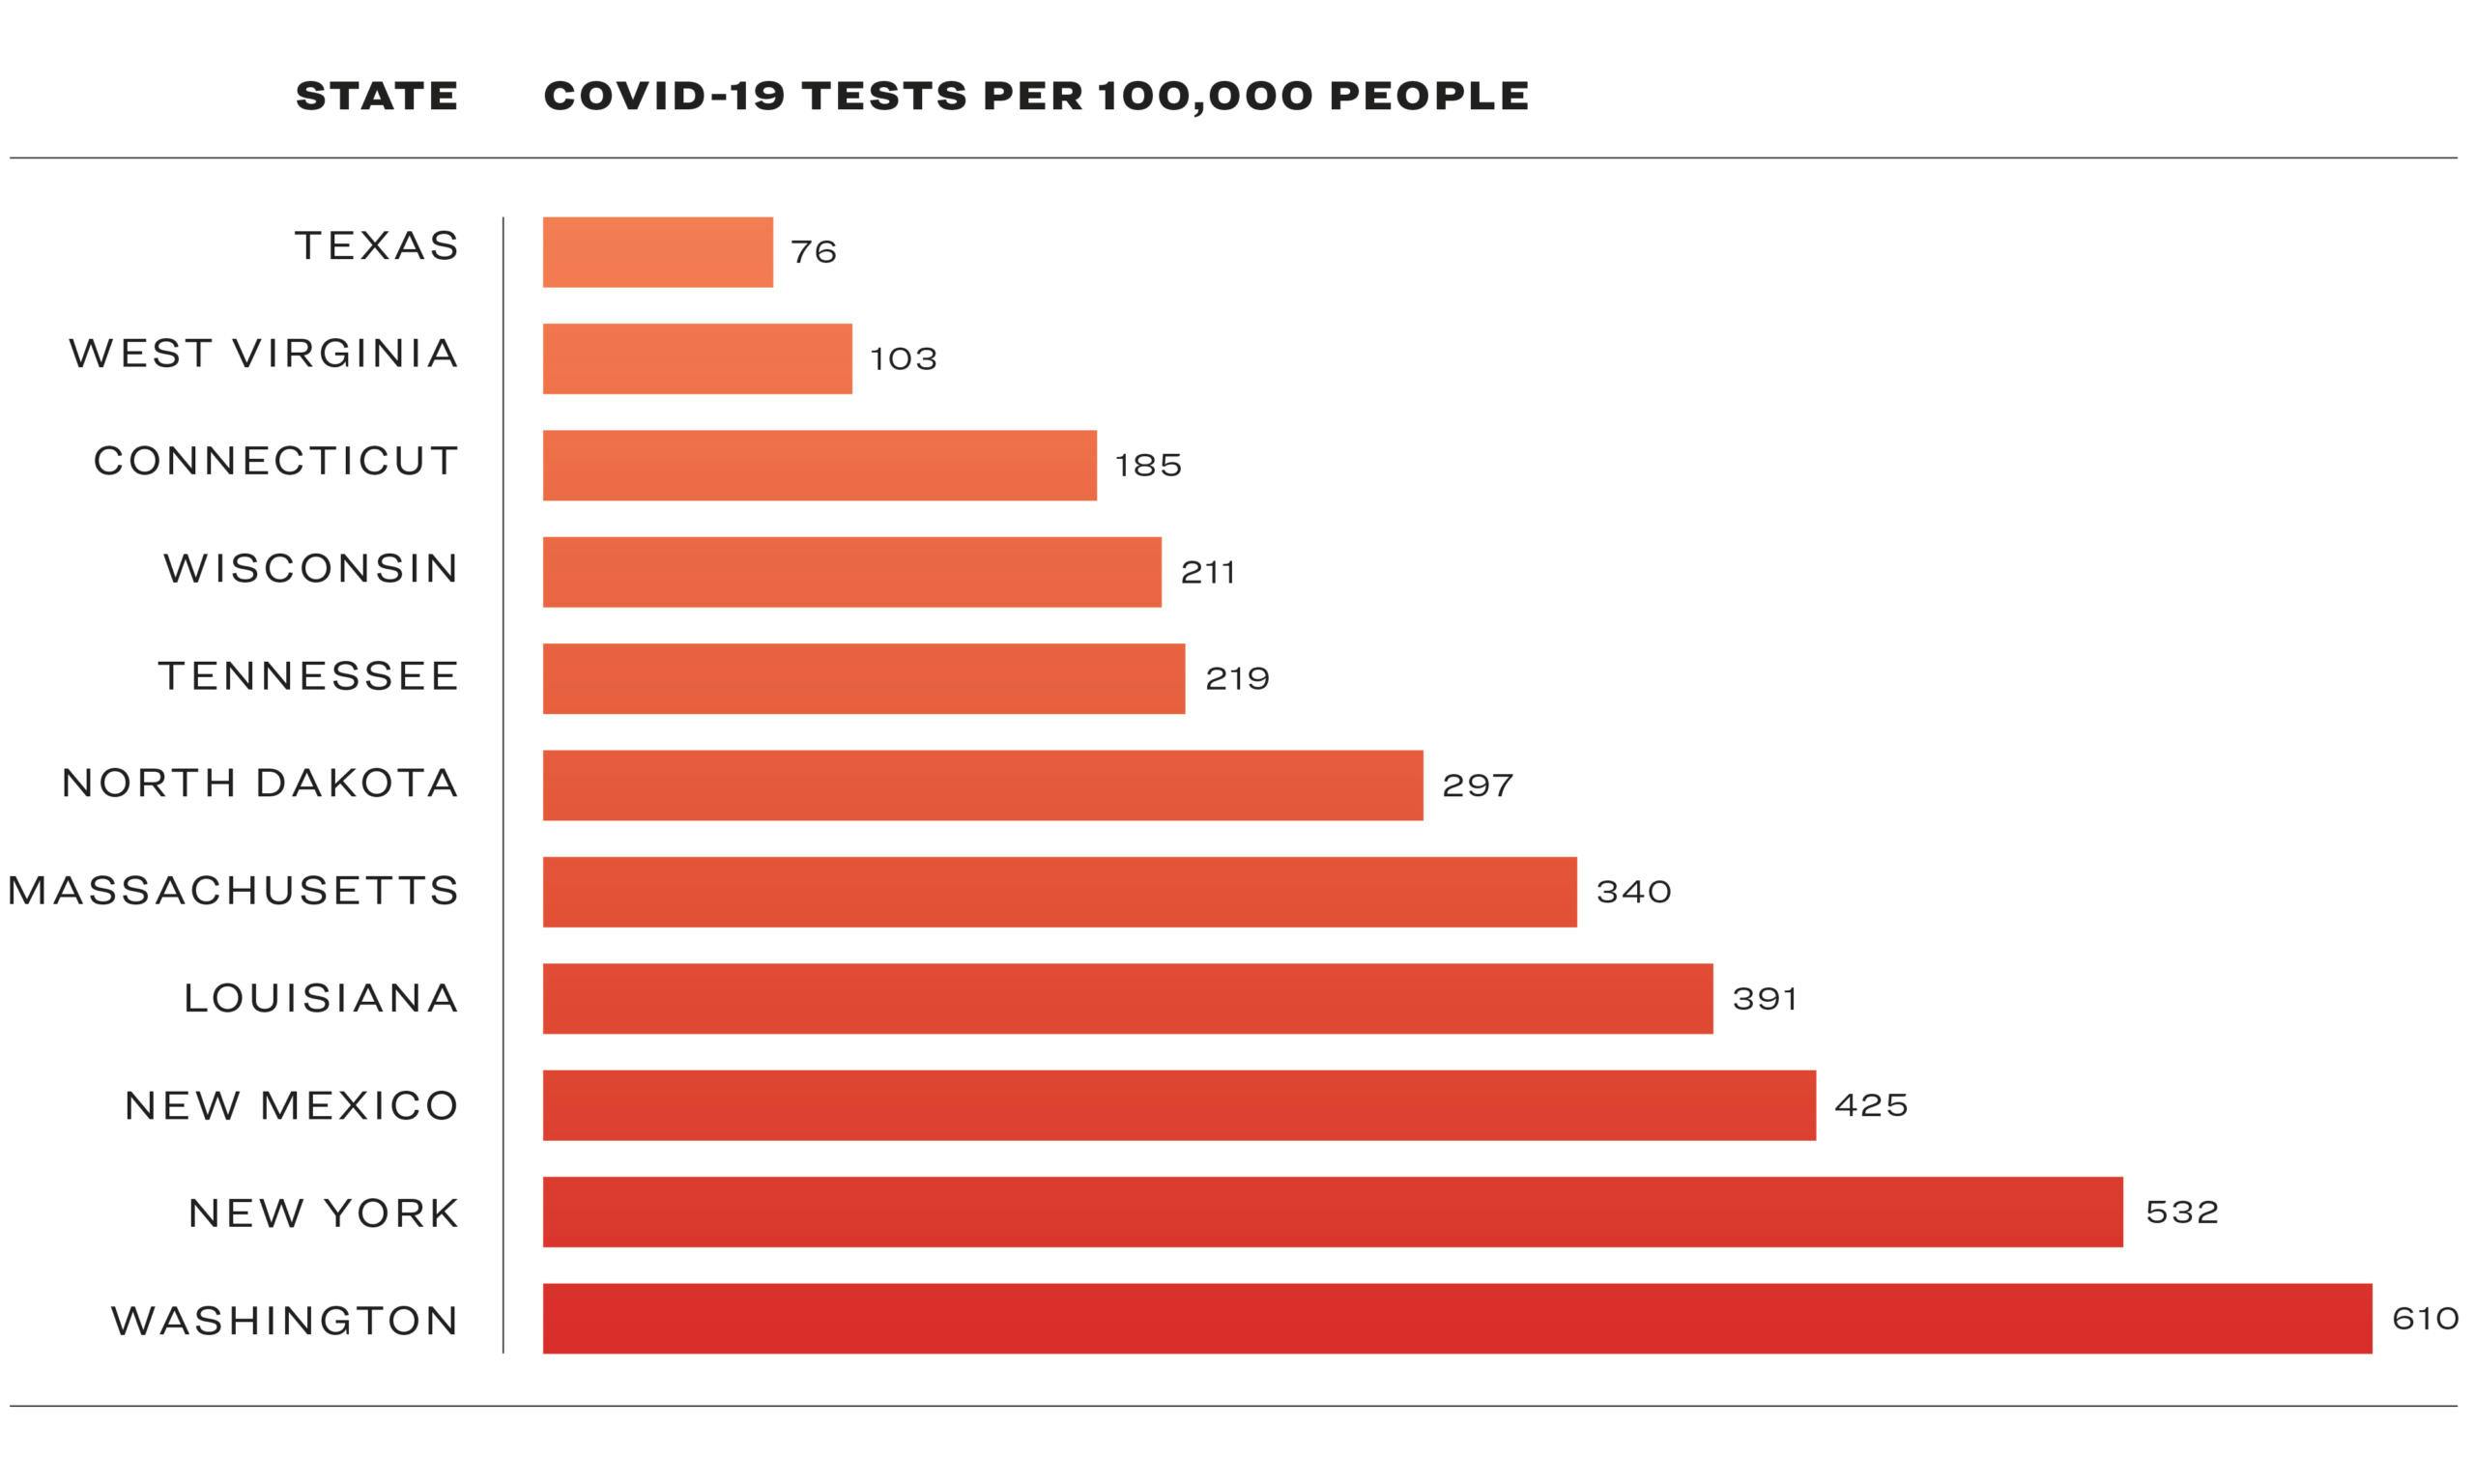 Covid-19 tests per 100,000 people